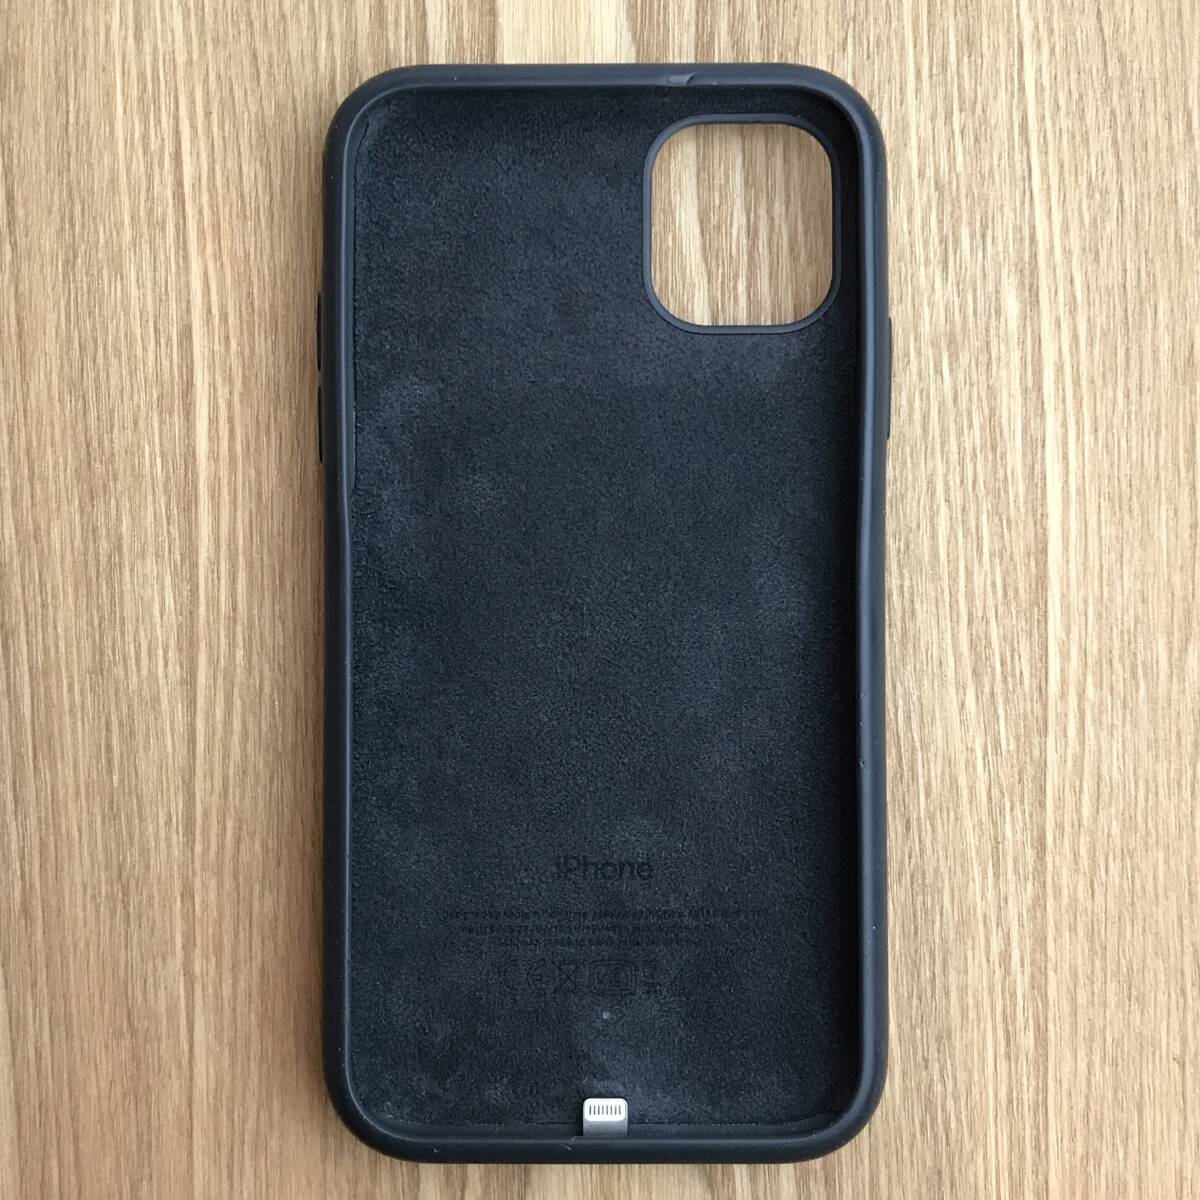 APPLE純正 iPhone 11 Smart Battery Case with Wireless Charging スマートバッテリーケース ワイヤレスチャージング ブラックの画像6